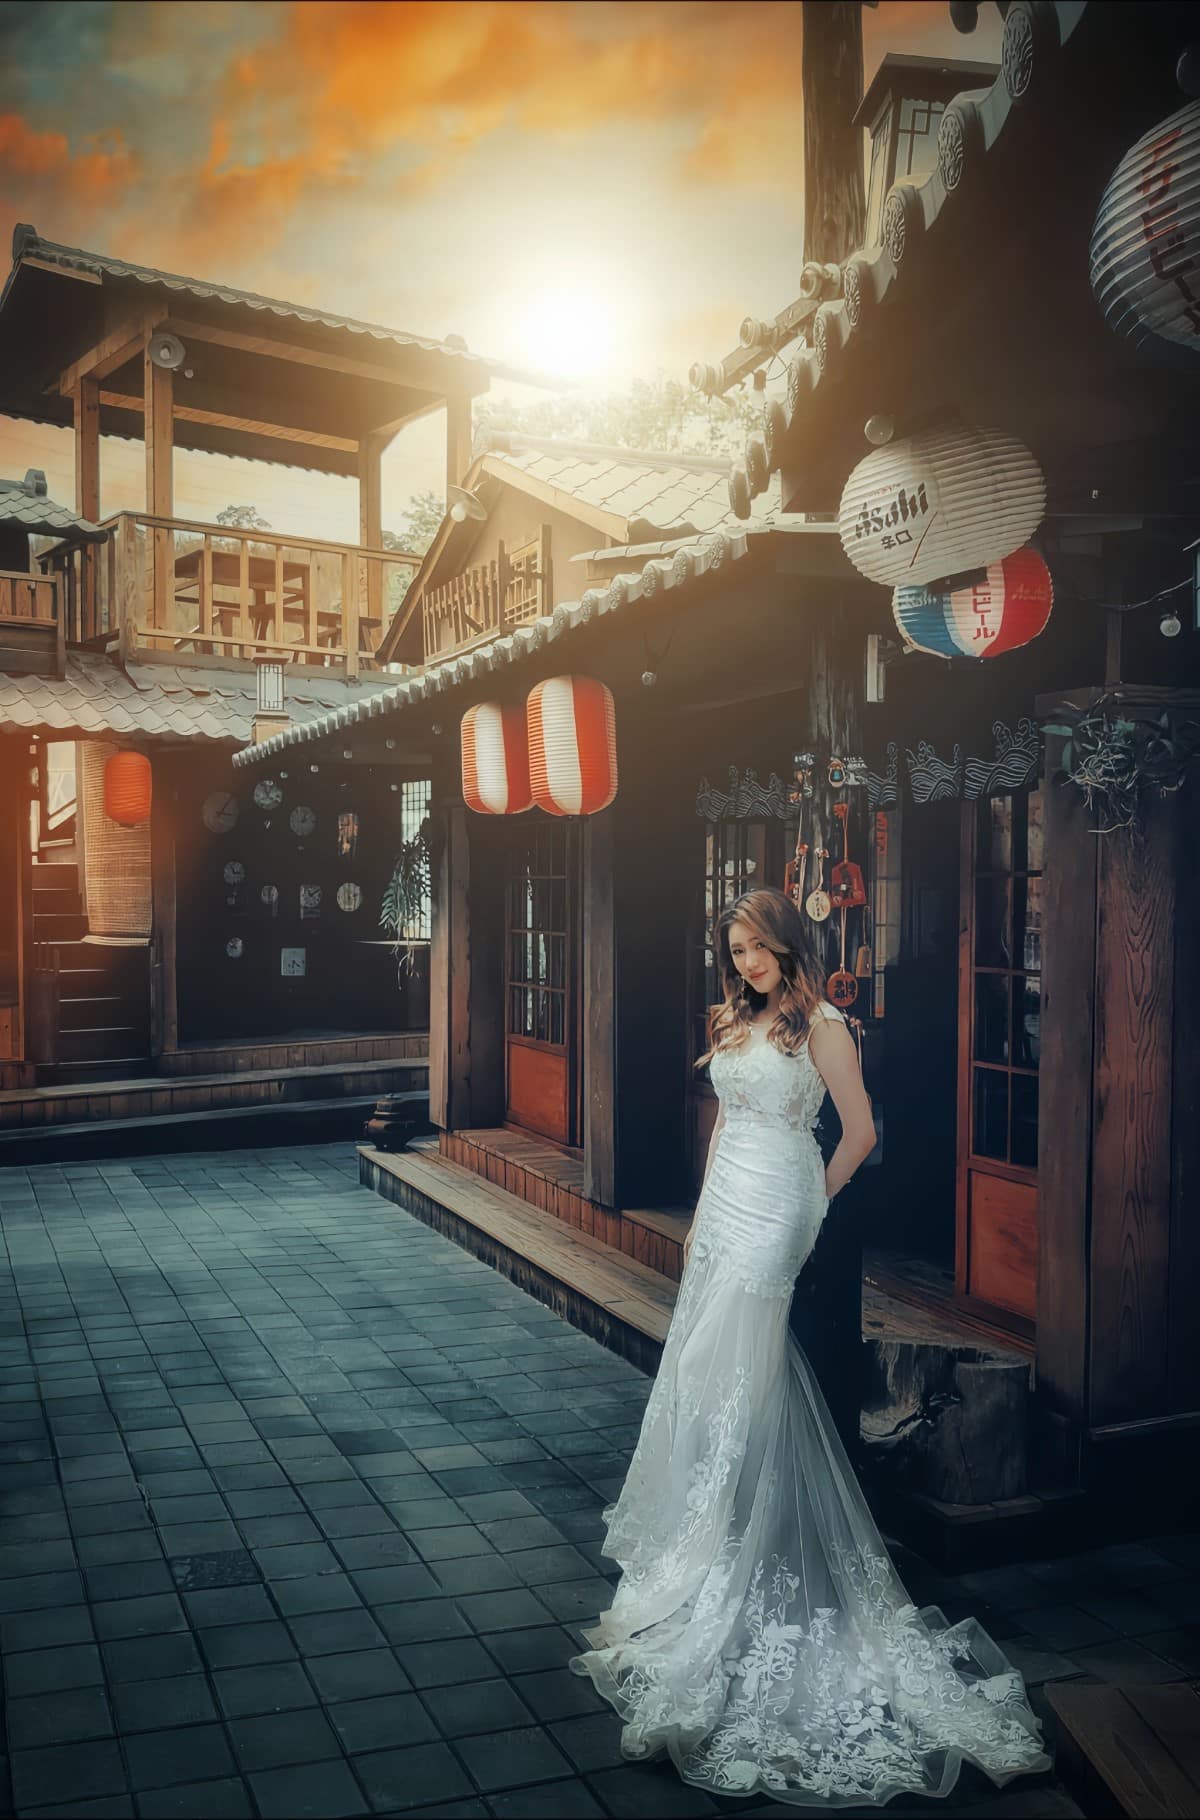 Japanese-style Kyoto architecture combined with single wedding dress